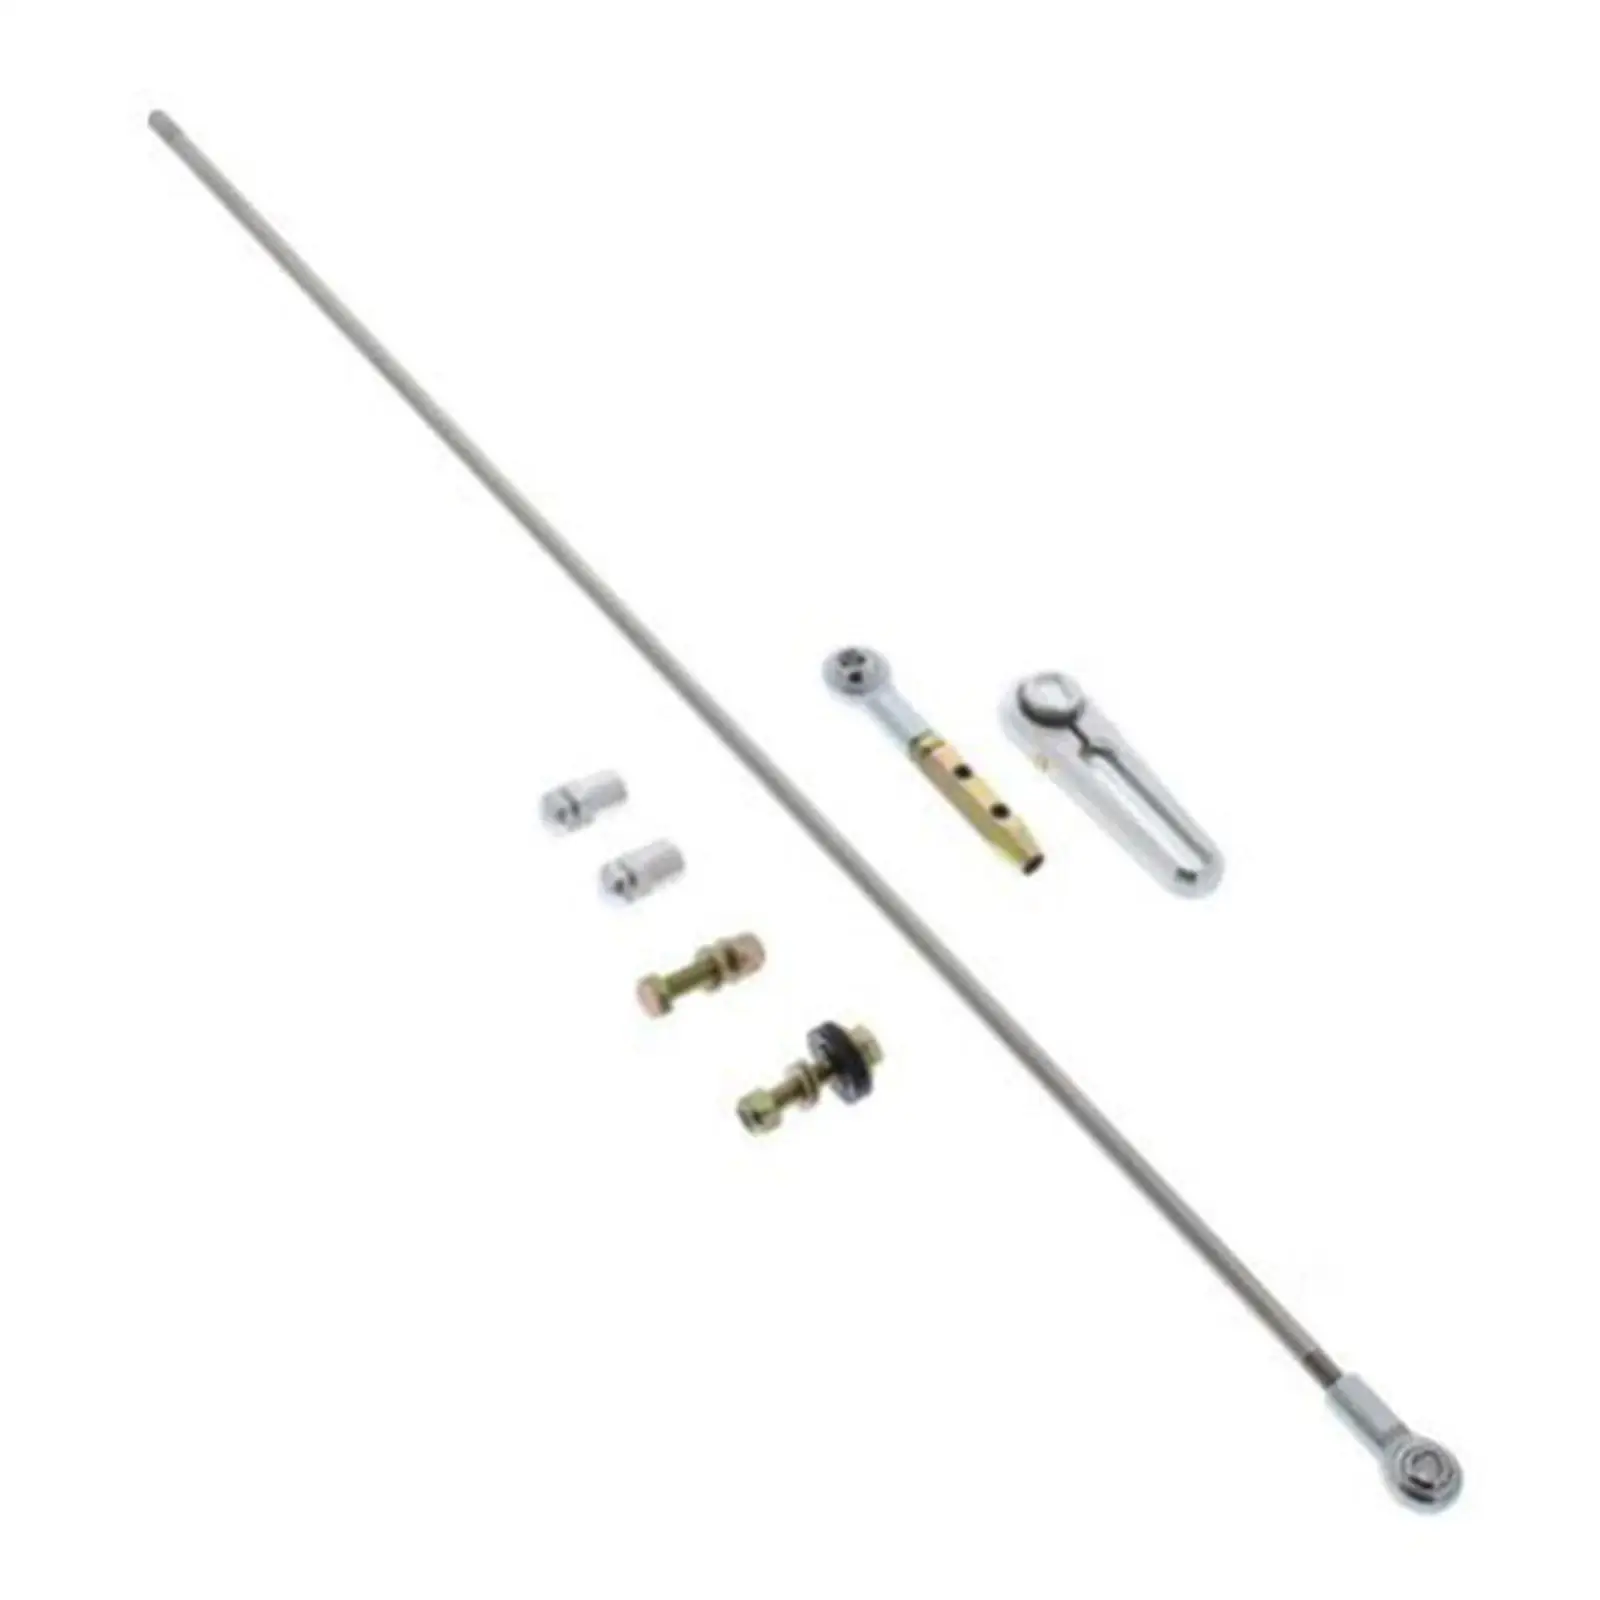 Transmission Shift Linkage Kit Adjustable Spare Parts Durable Easy to Mount Automotive Accessory Replaces for GM 700R4 4L60